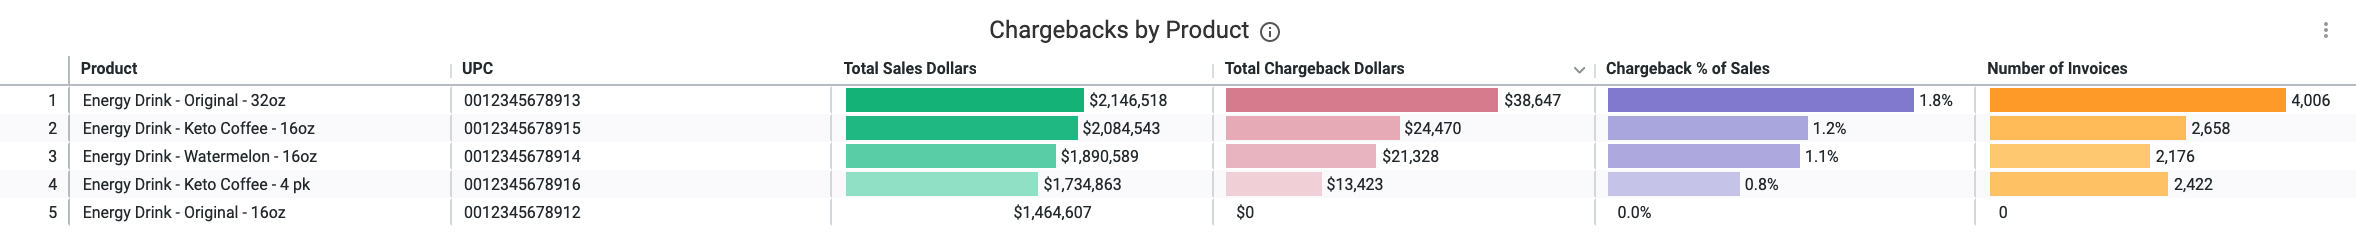 Chargebacks_by_Product.png